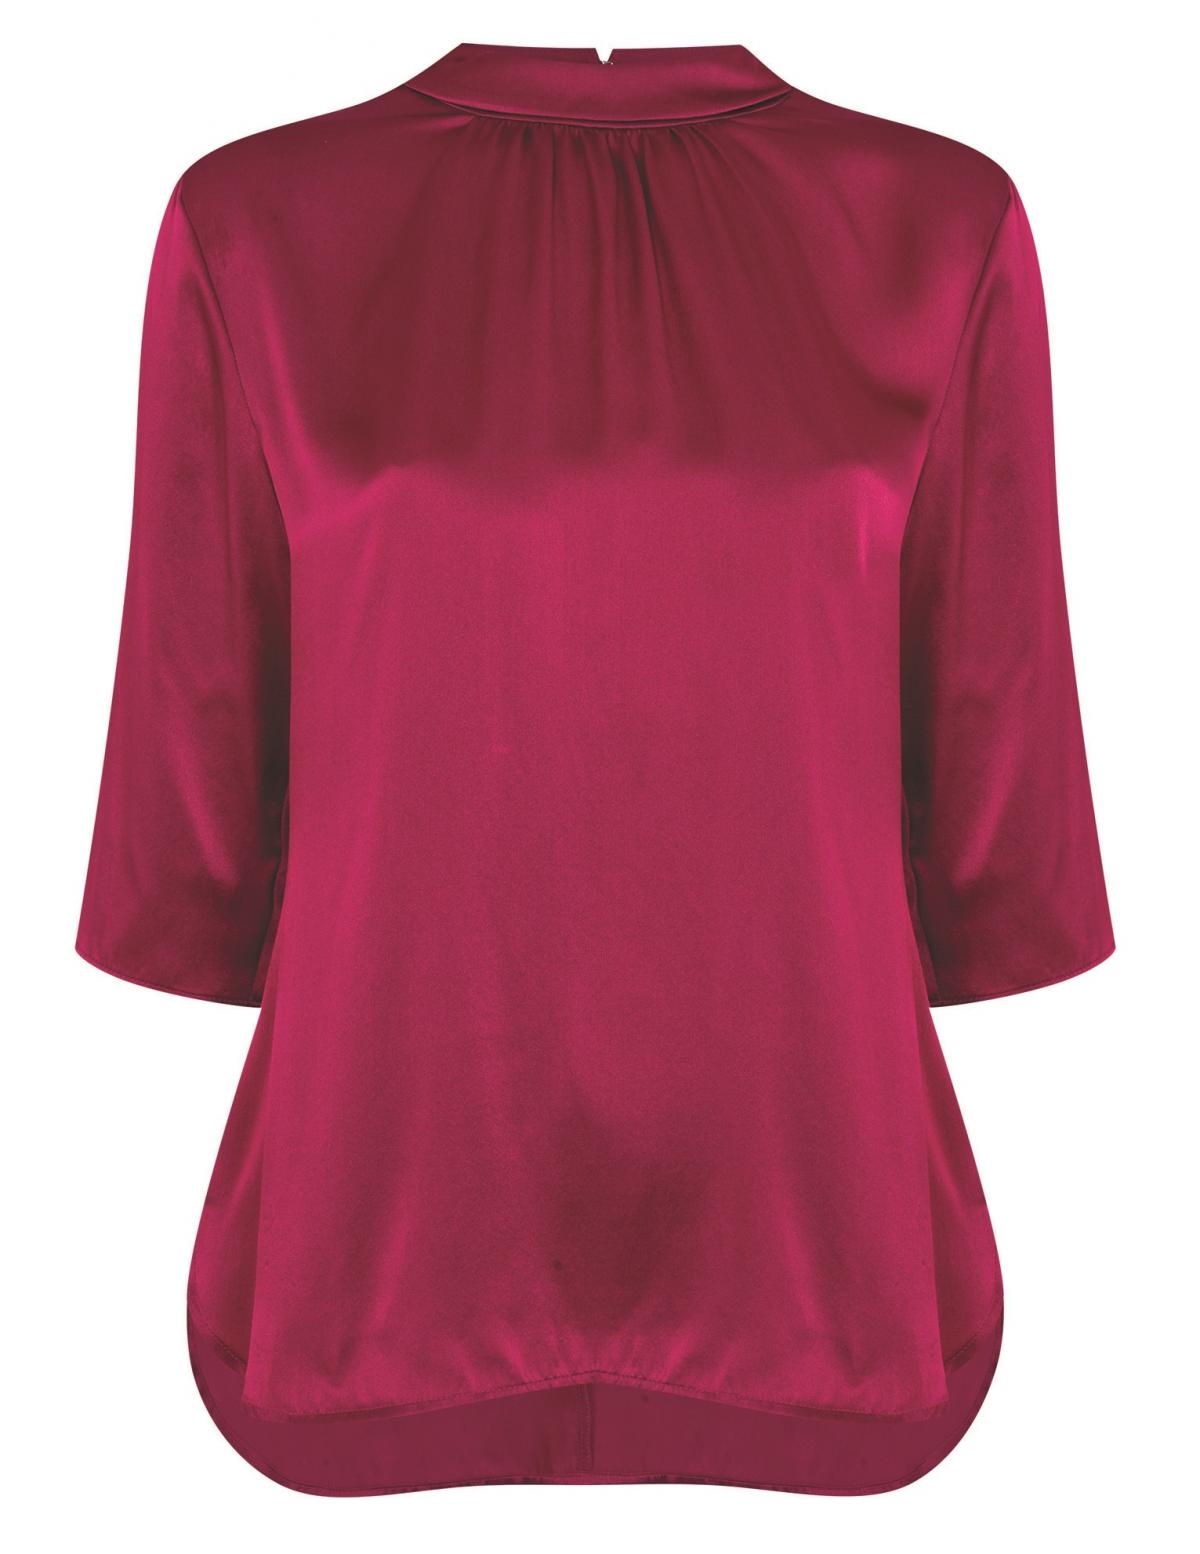 Laura Ashley, Silk Satin Blouse, £75 with 10% donation